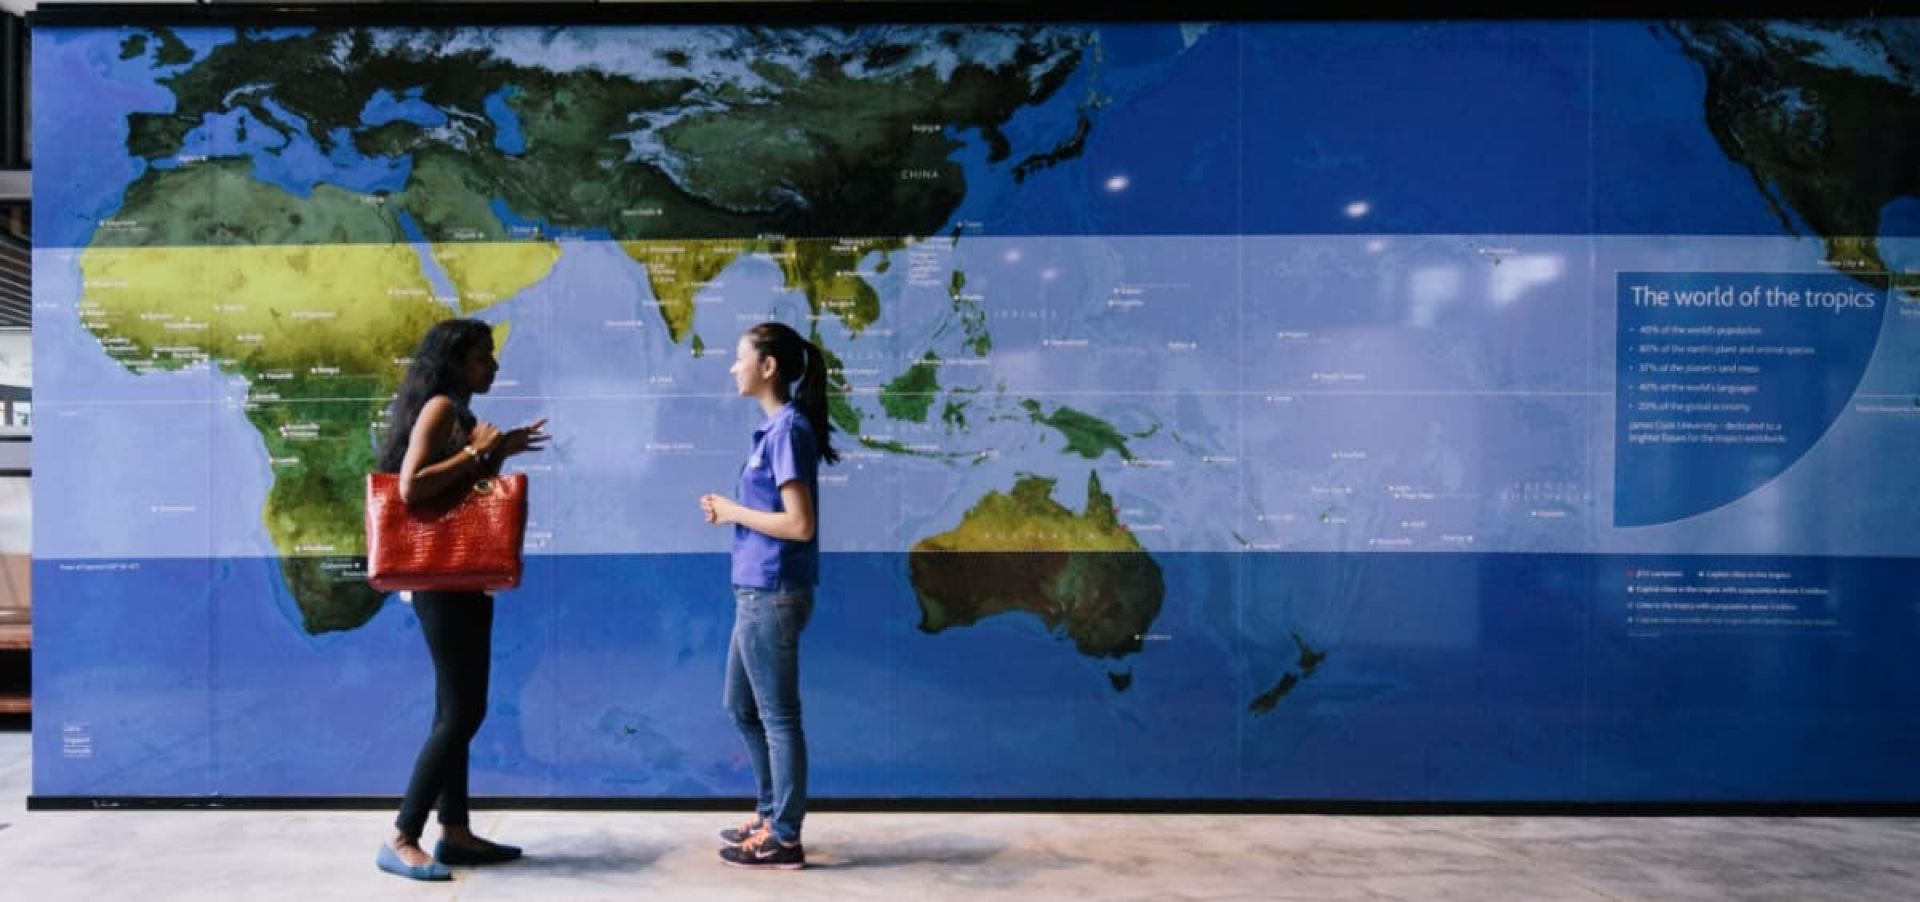 Two students chatting in front of a map of the Tropics